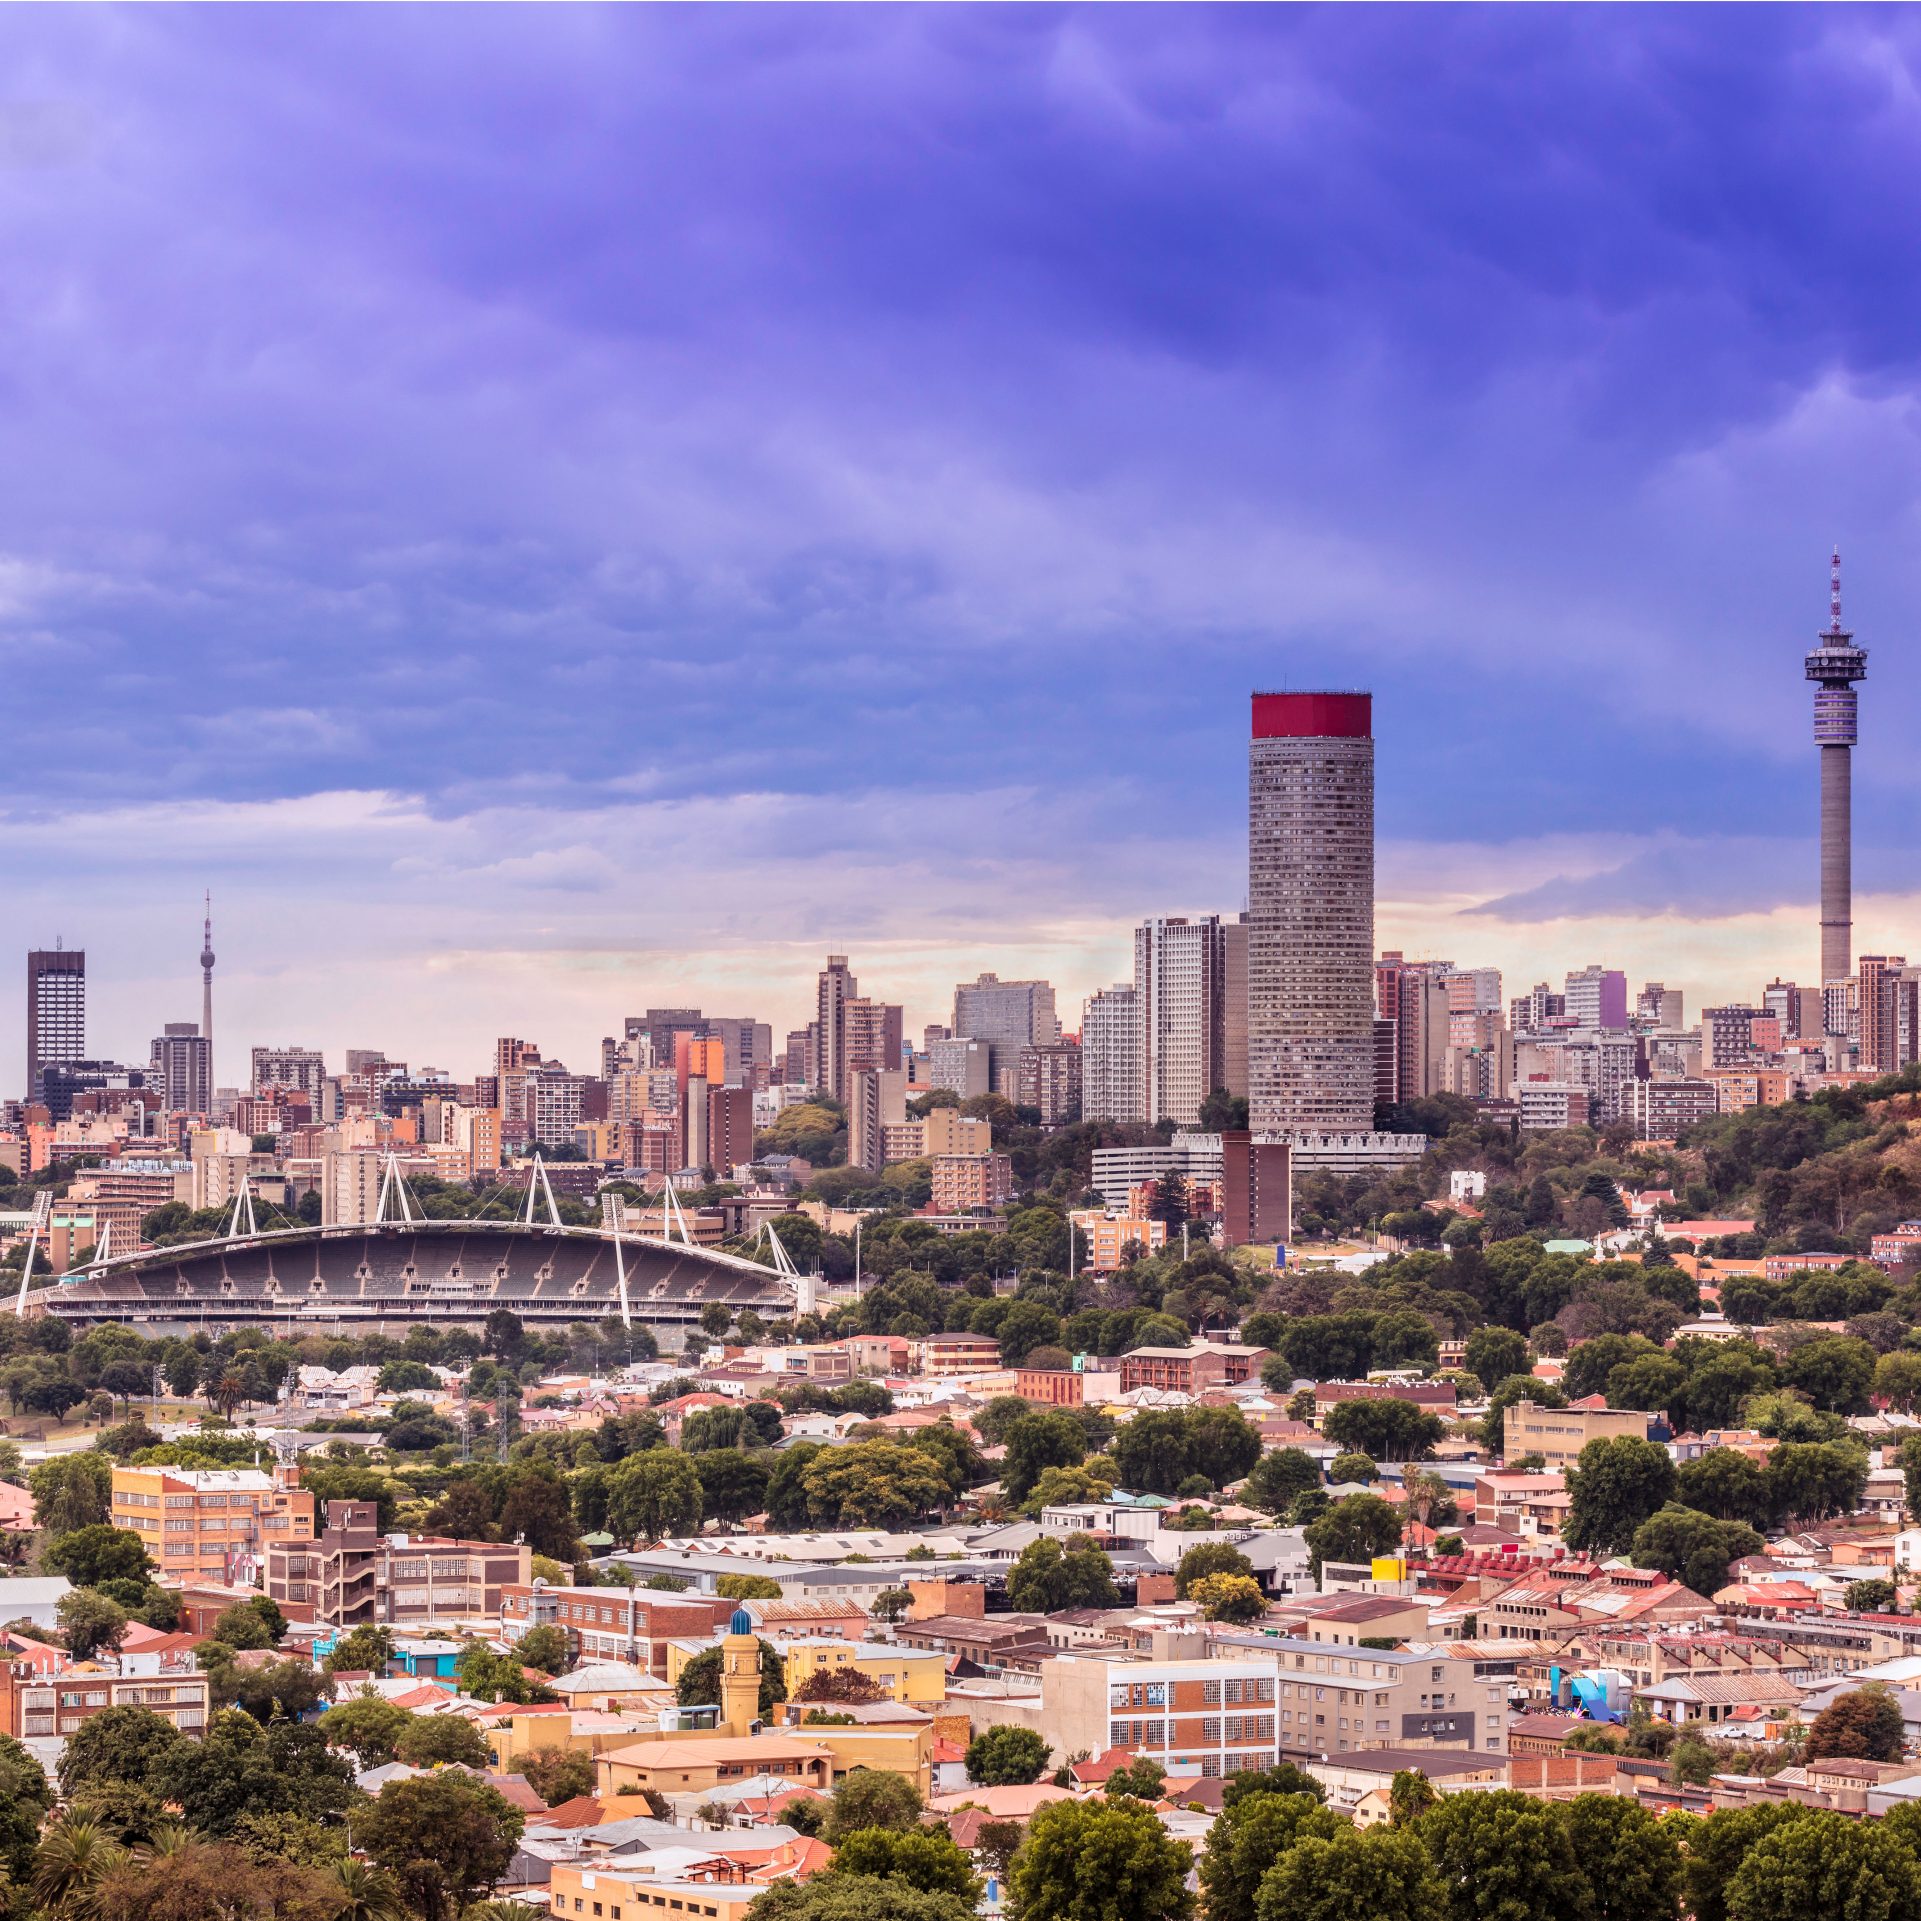 The picture shows the city of Midrand.